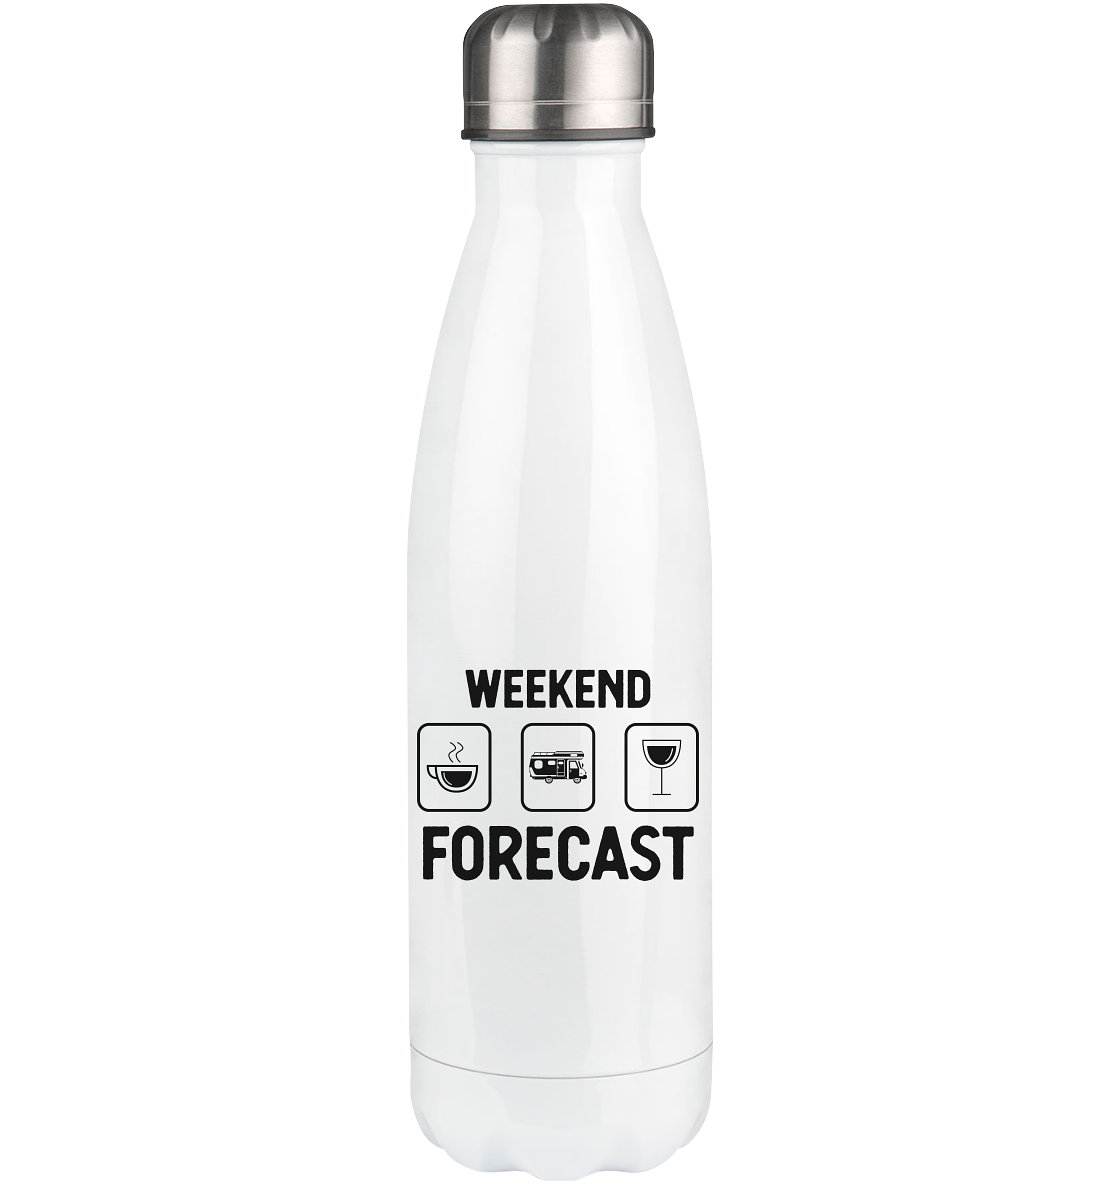 Weekend Forecast - Edelstahl Thermosflasche camping UONP 500ml